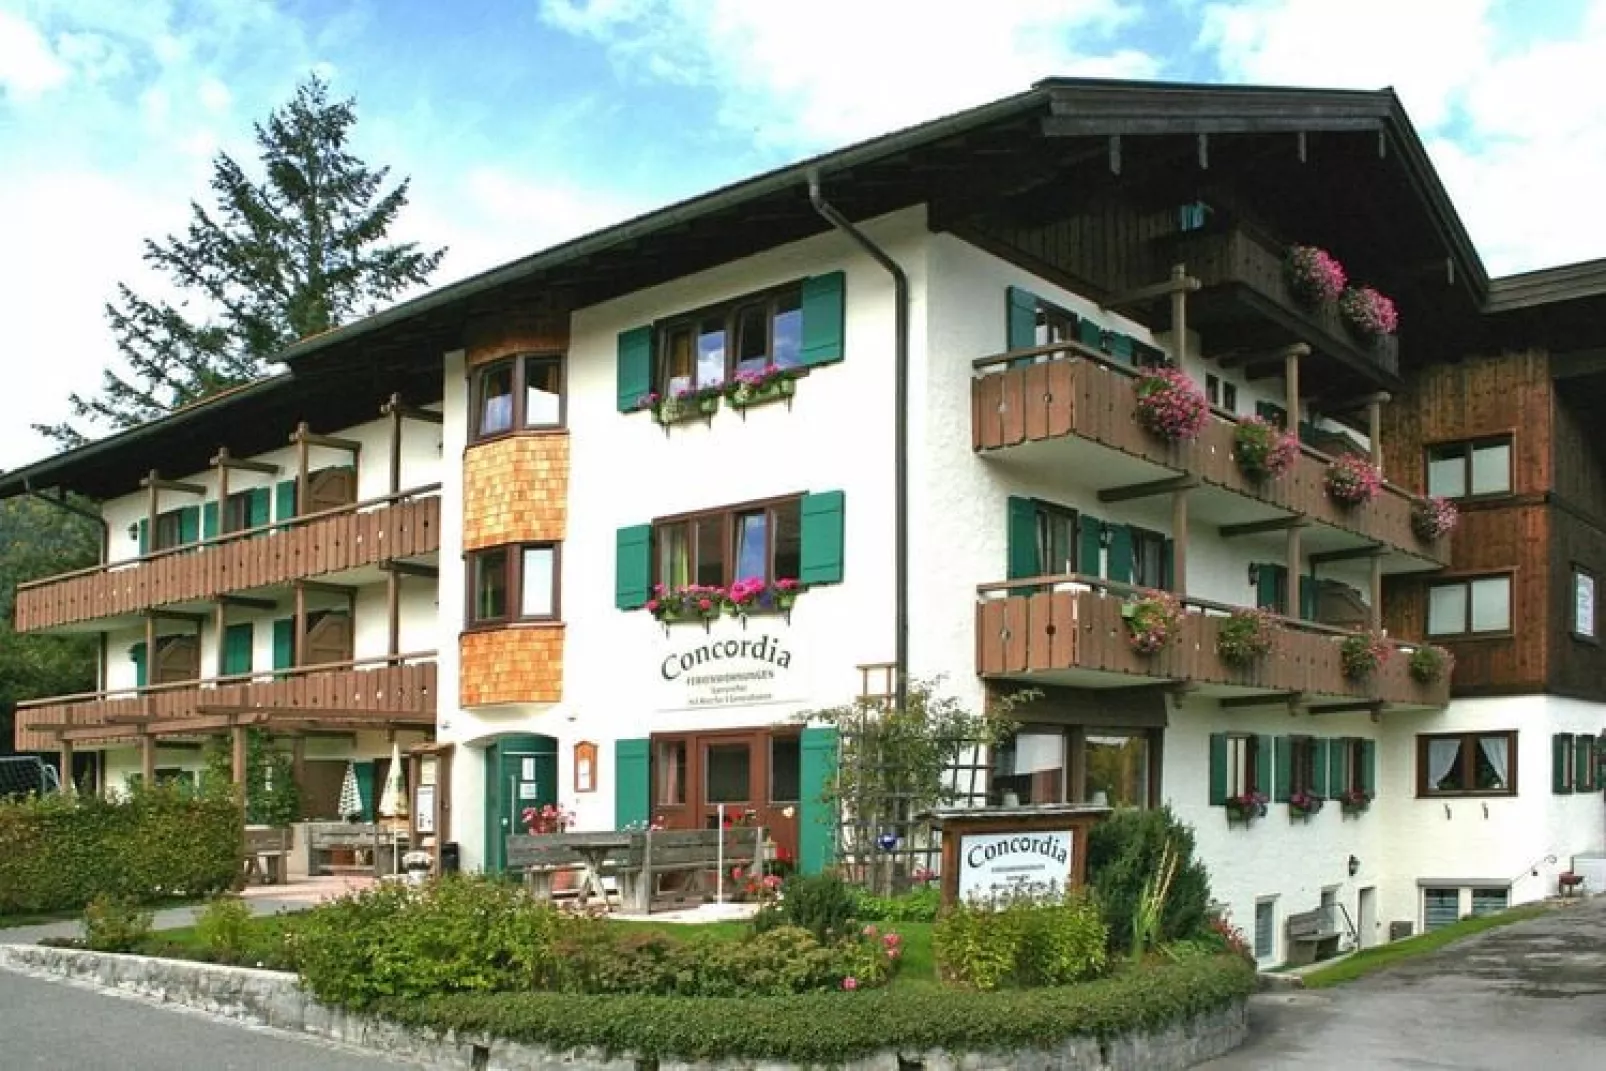 Haus Concordia in Bad Wiessee am Tegernsee Typ C 56 qm-Buitenkant zomer